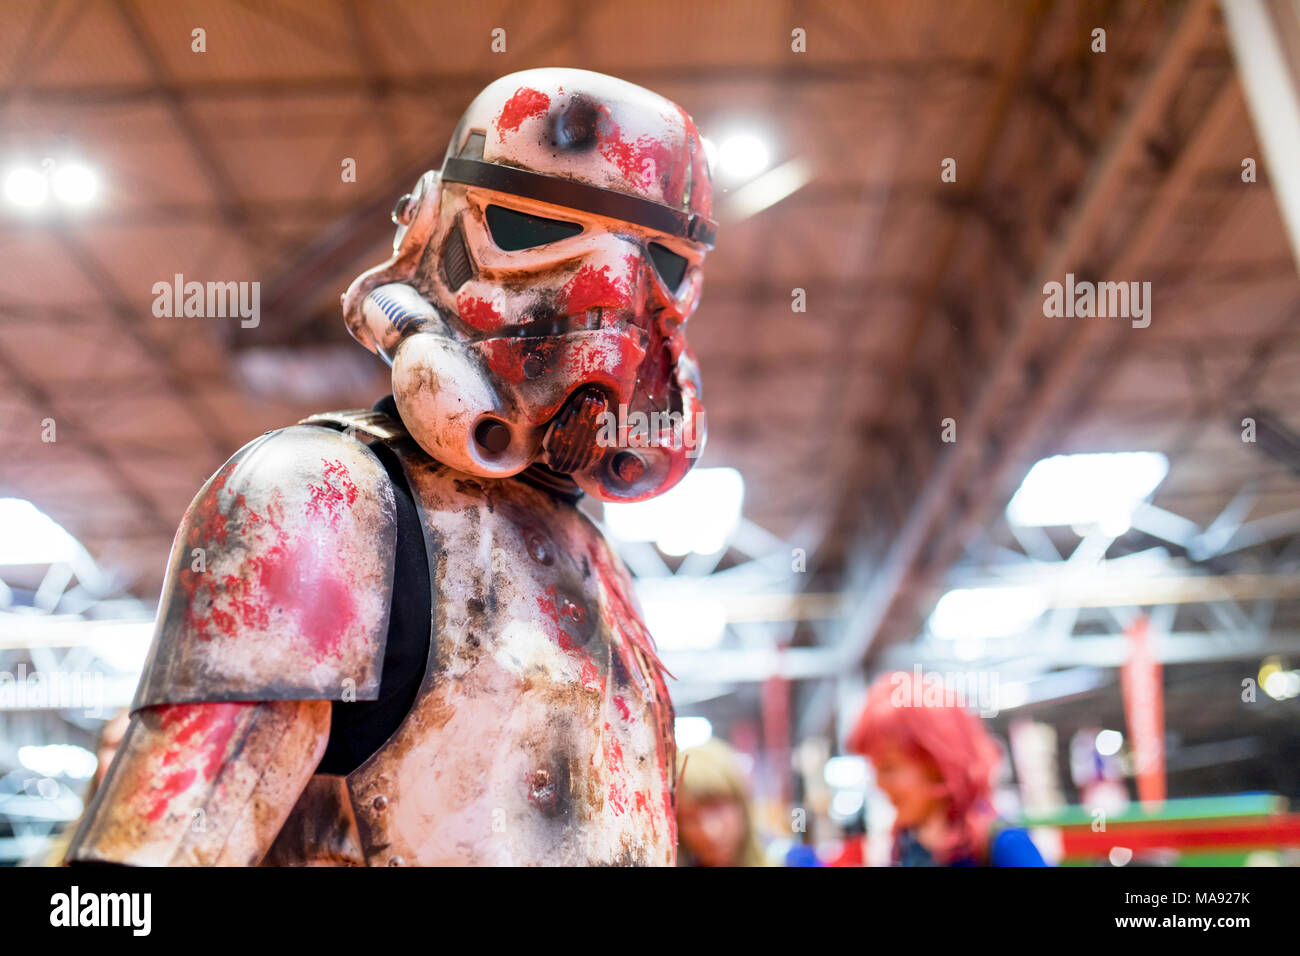 Birmingham, UK - March 17, 2018. A cosplayer dressed as a battered, bloodied and war torn Storm Trooper costume from Star Wars movies at a comic con i Stock Photo